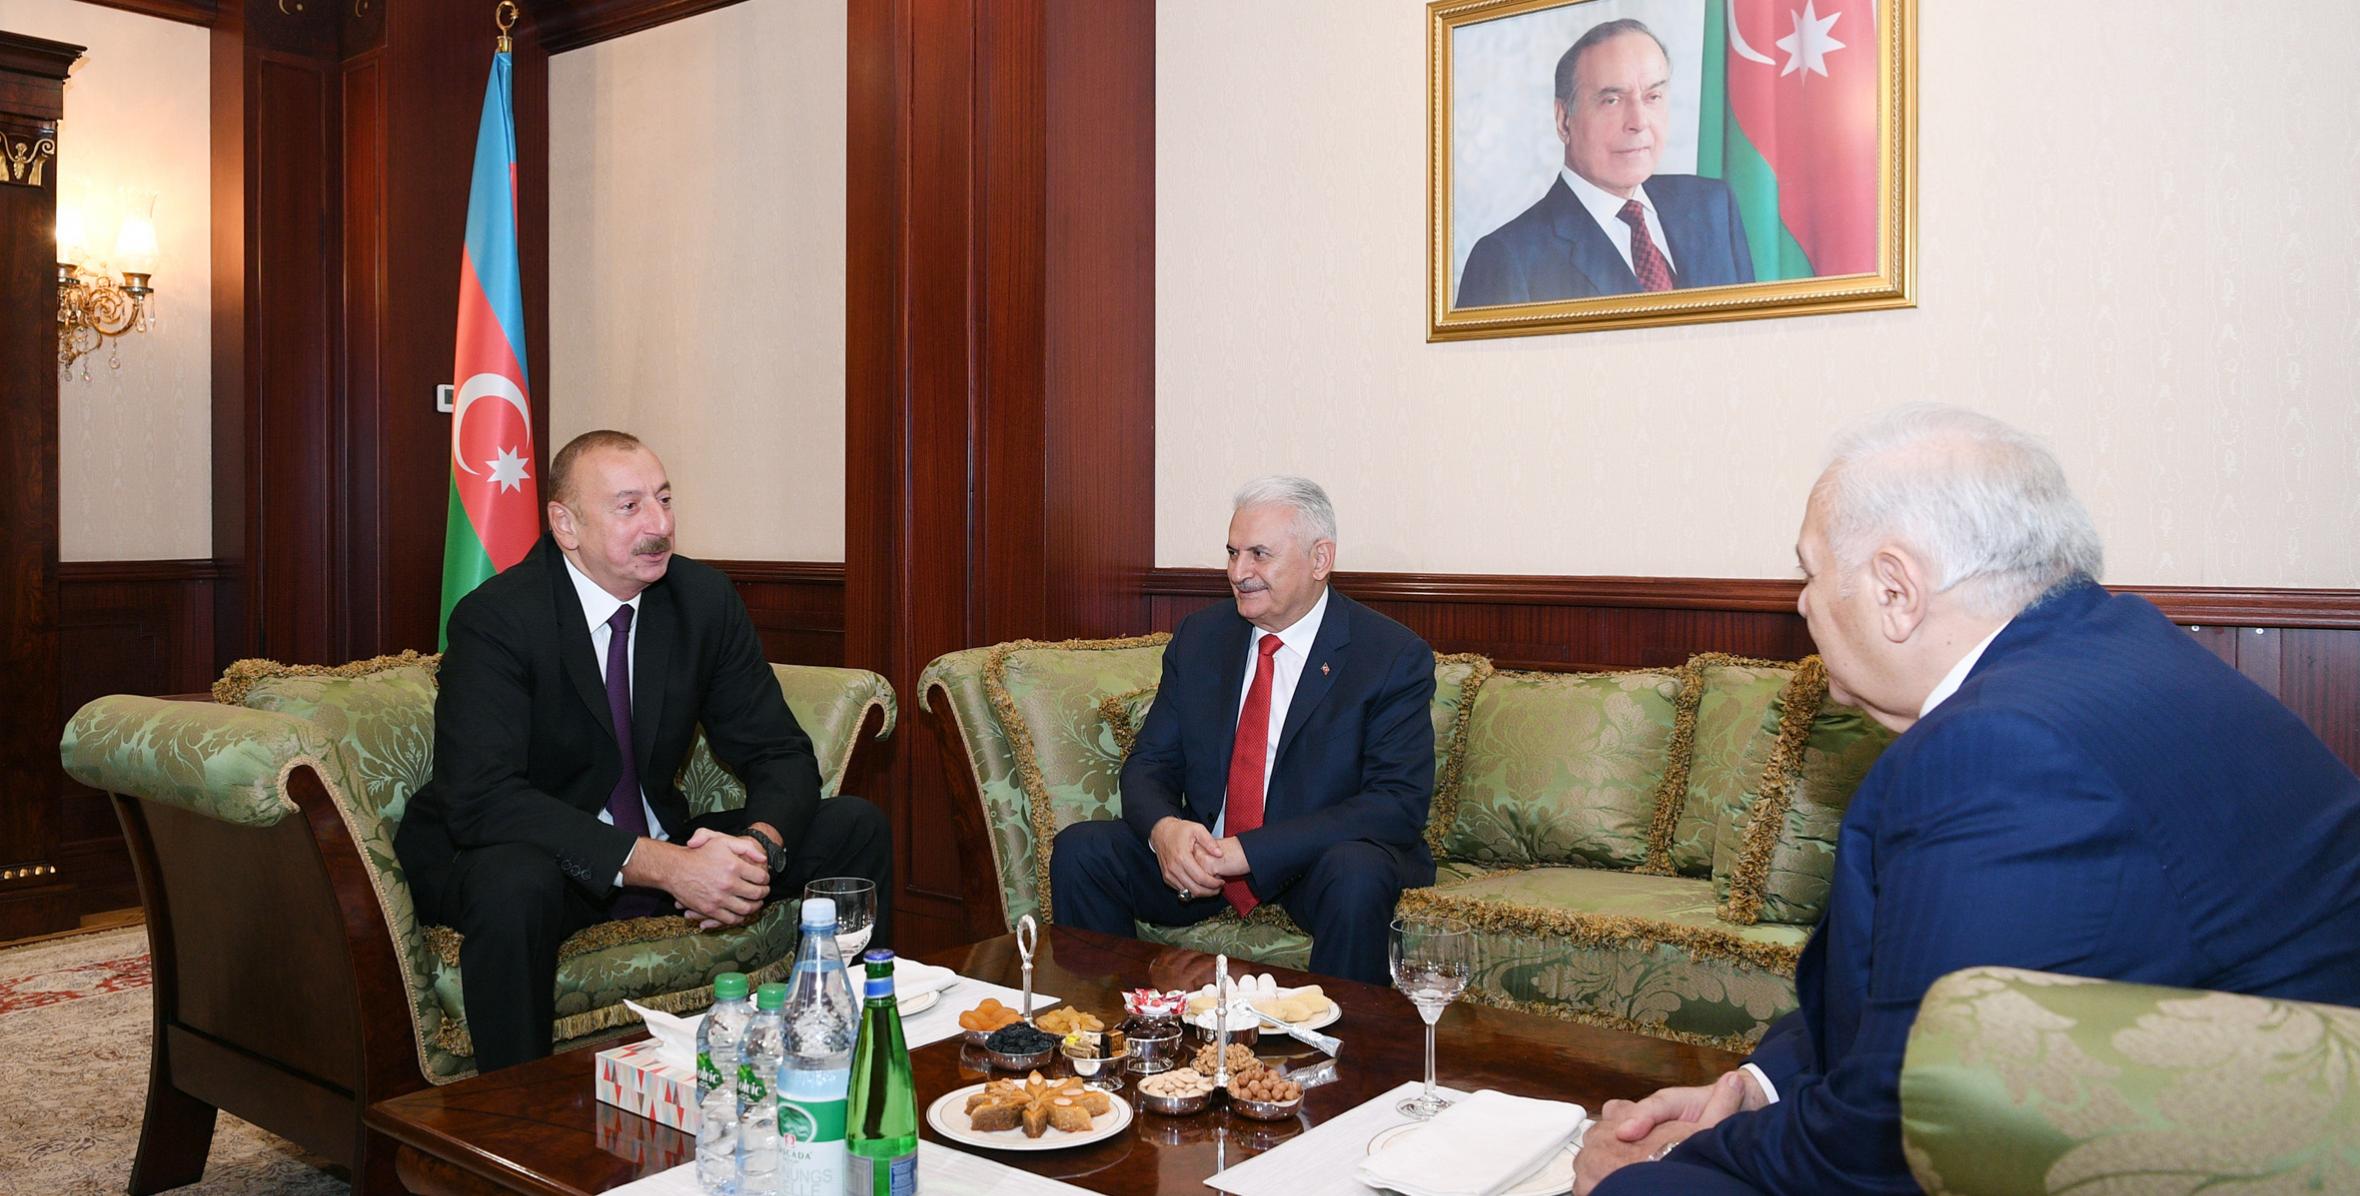 Ilham Aliyev met with Speaker of Grand National Assembly of Turkey